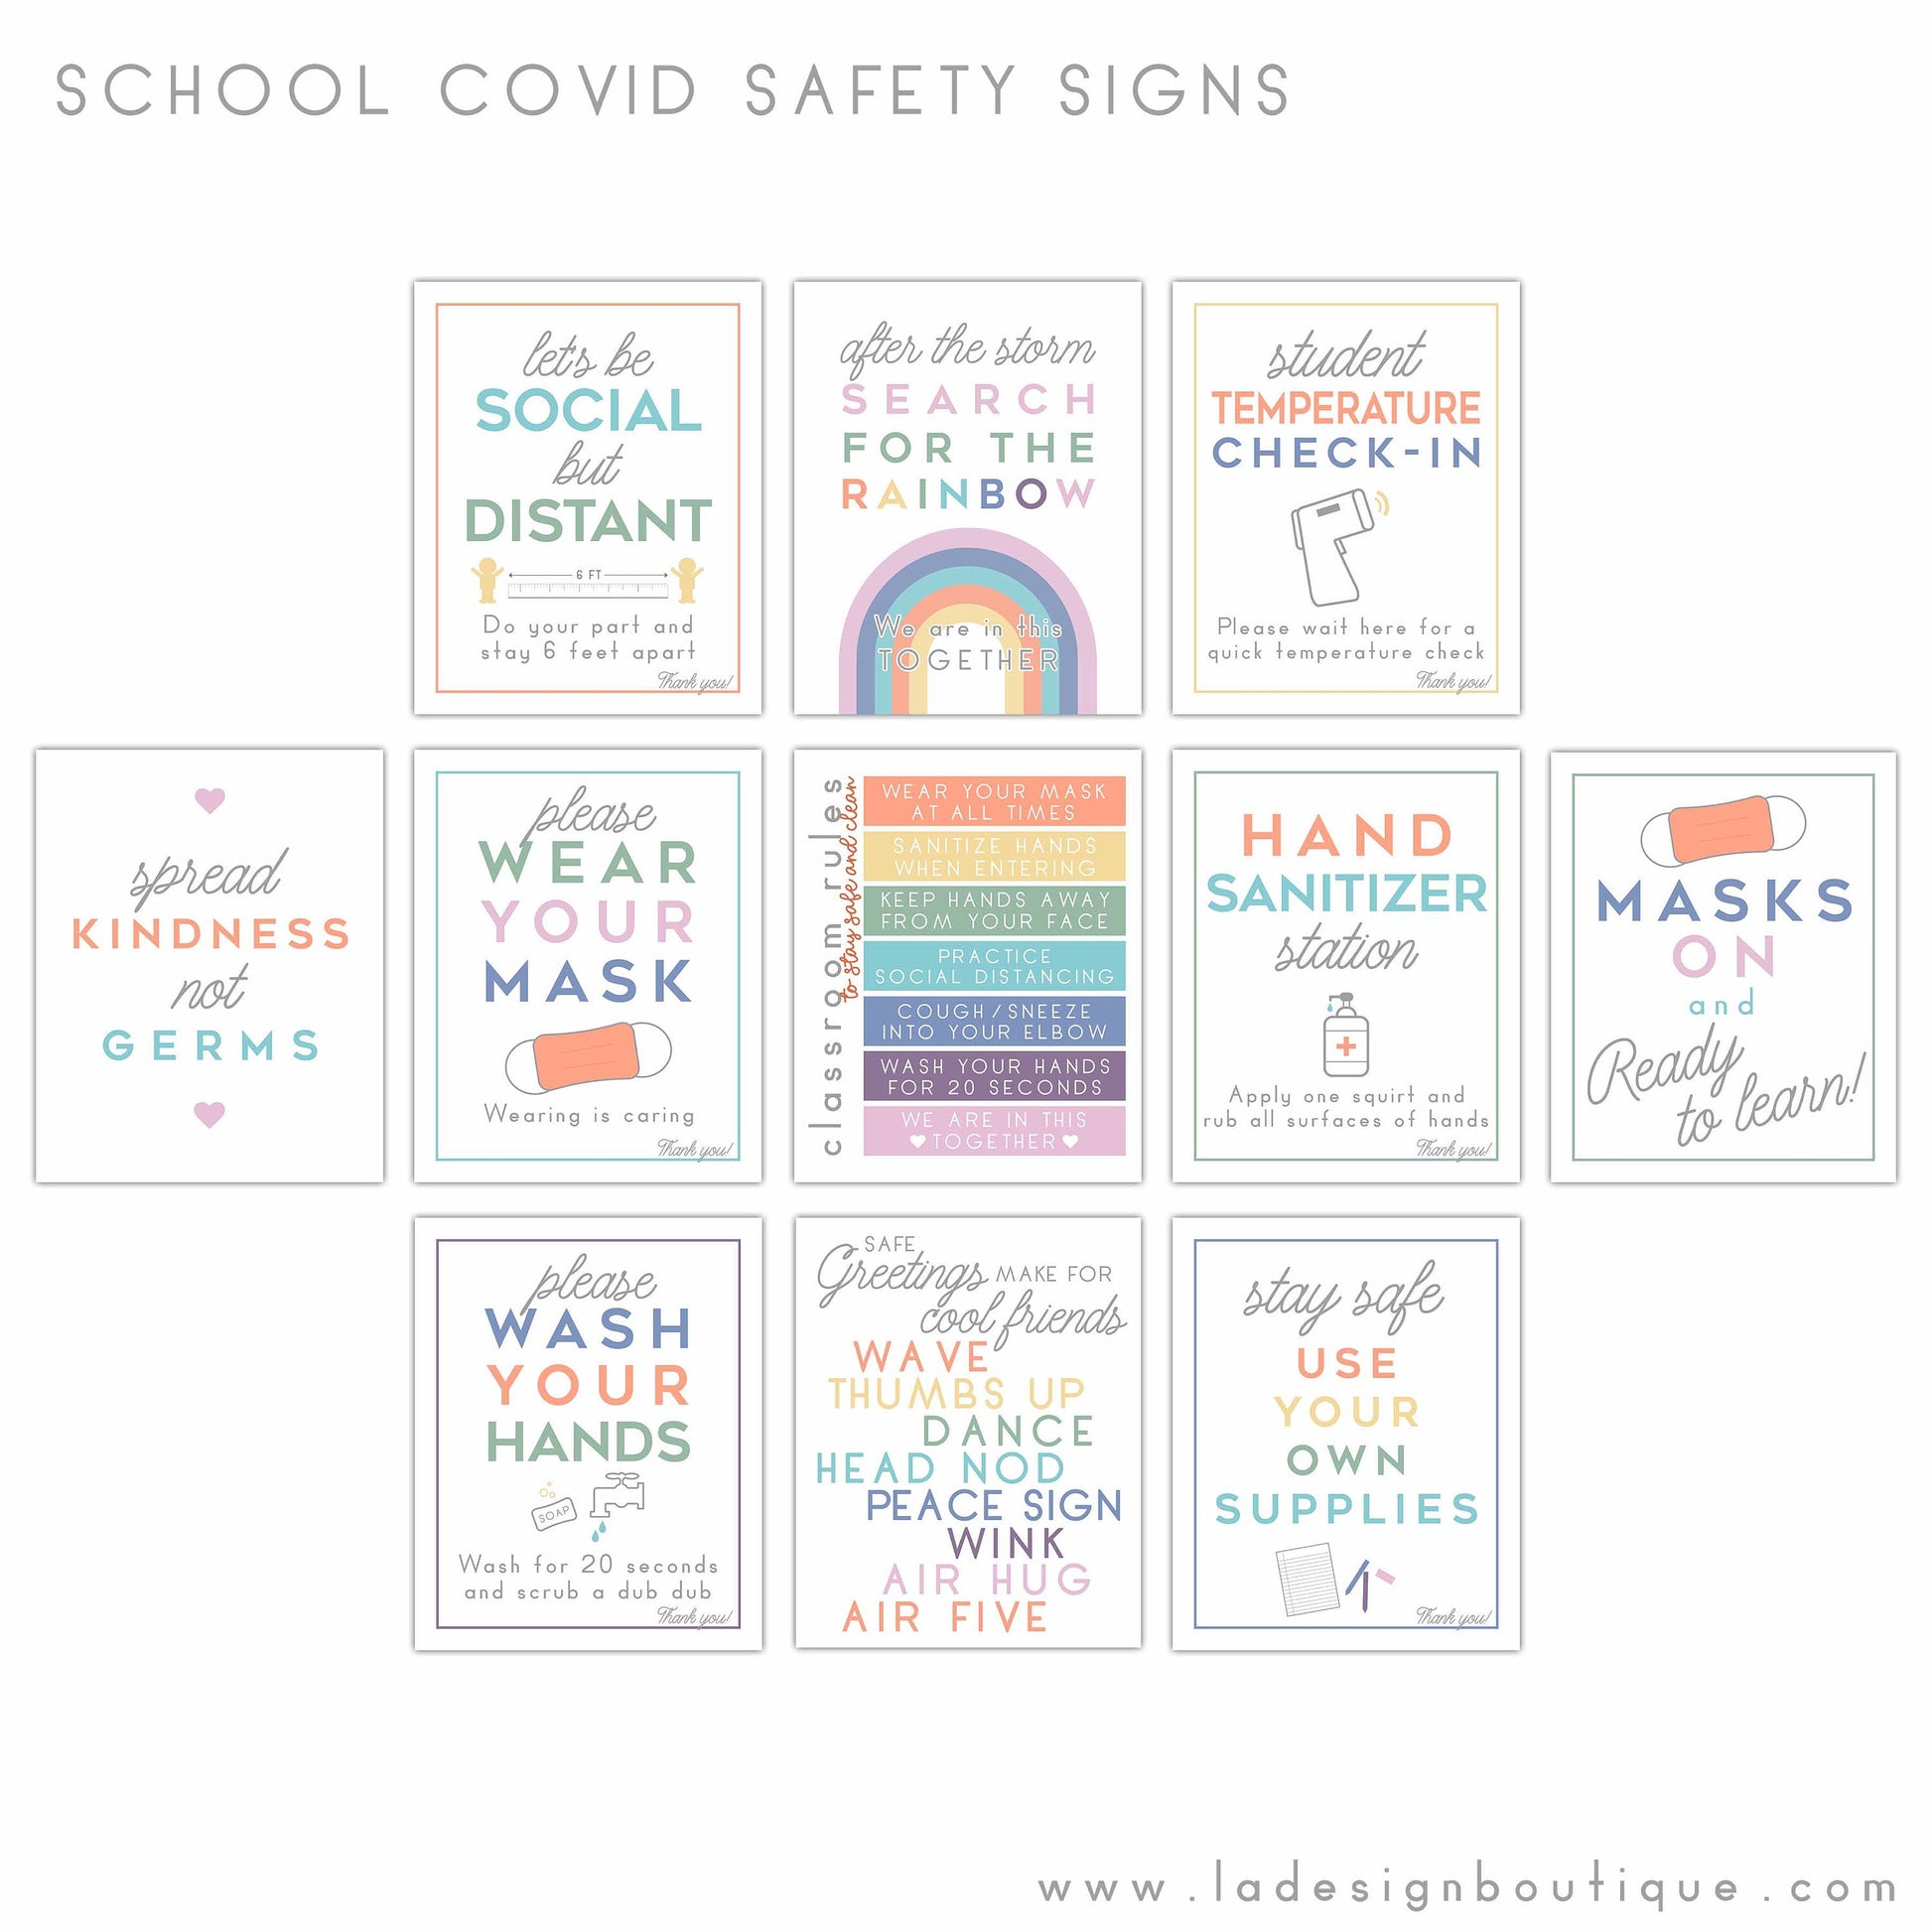 Classroom Signs, COVID Signs, School Health Safety, Wear a Mask, Social Distancing, Wash Your Hands, Sanitize Signs, Classroom Safety Poster